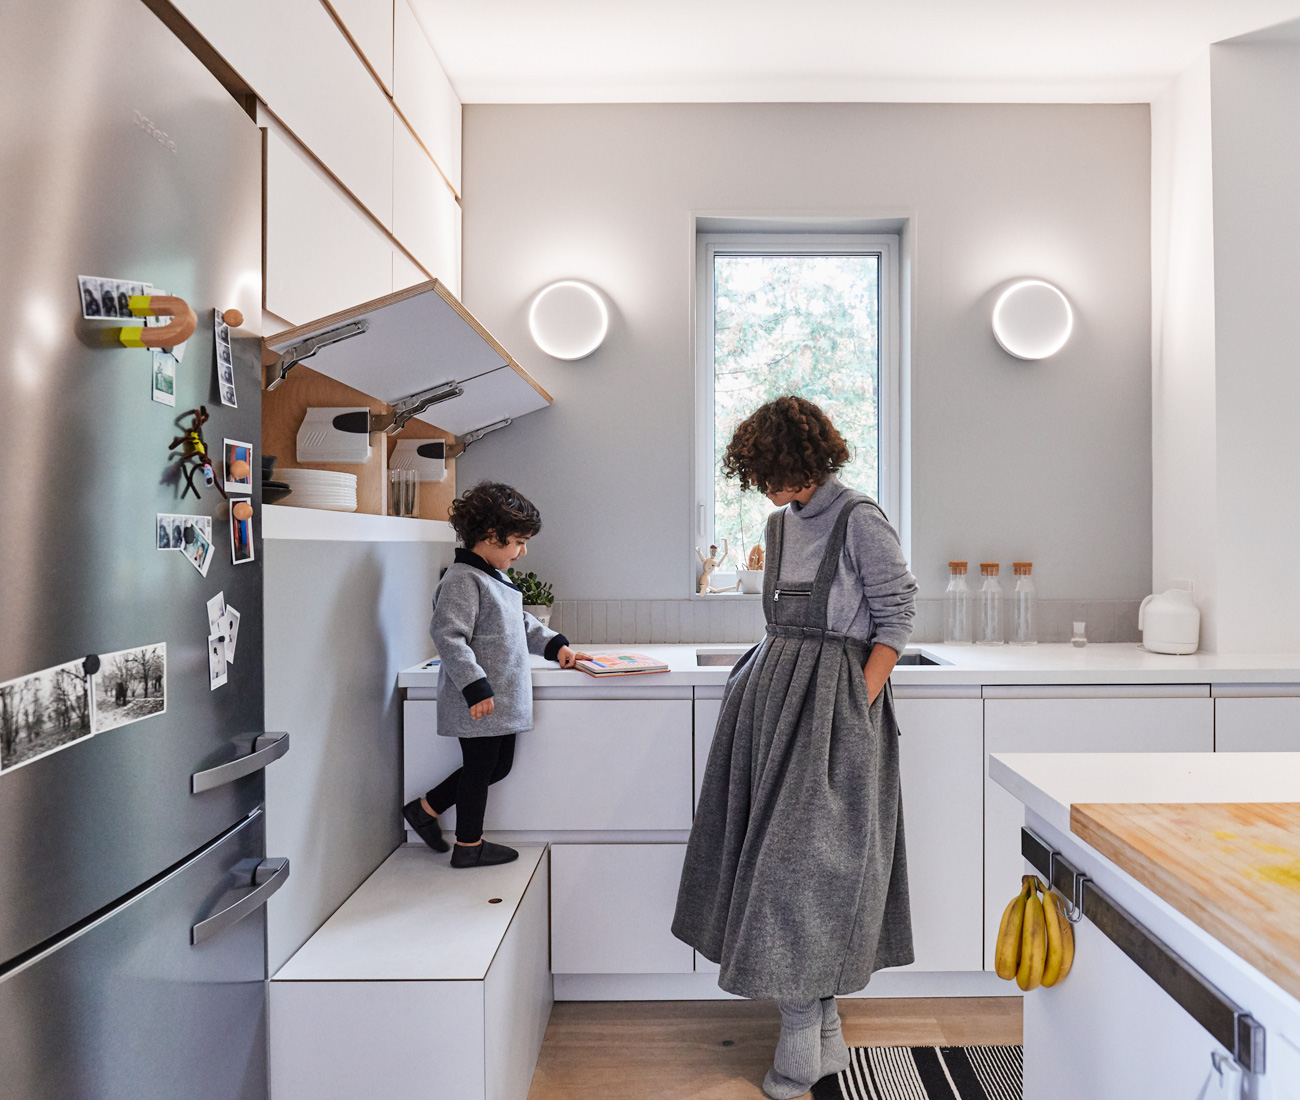 Designed by Saadatpajouh, of Space Animator, and fabricated by Ryan Wilding and Robin Clarke, the kitchen features pure white quartz countertops from Caesarstone and plywood cabinets. Lights by Toronto’s Anony; fridge by Miele.